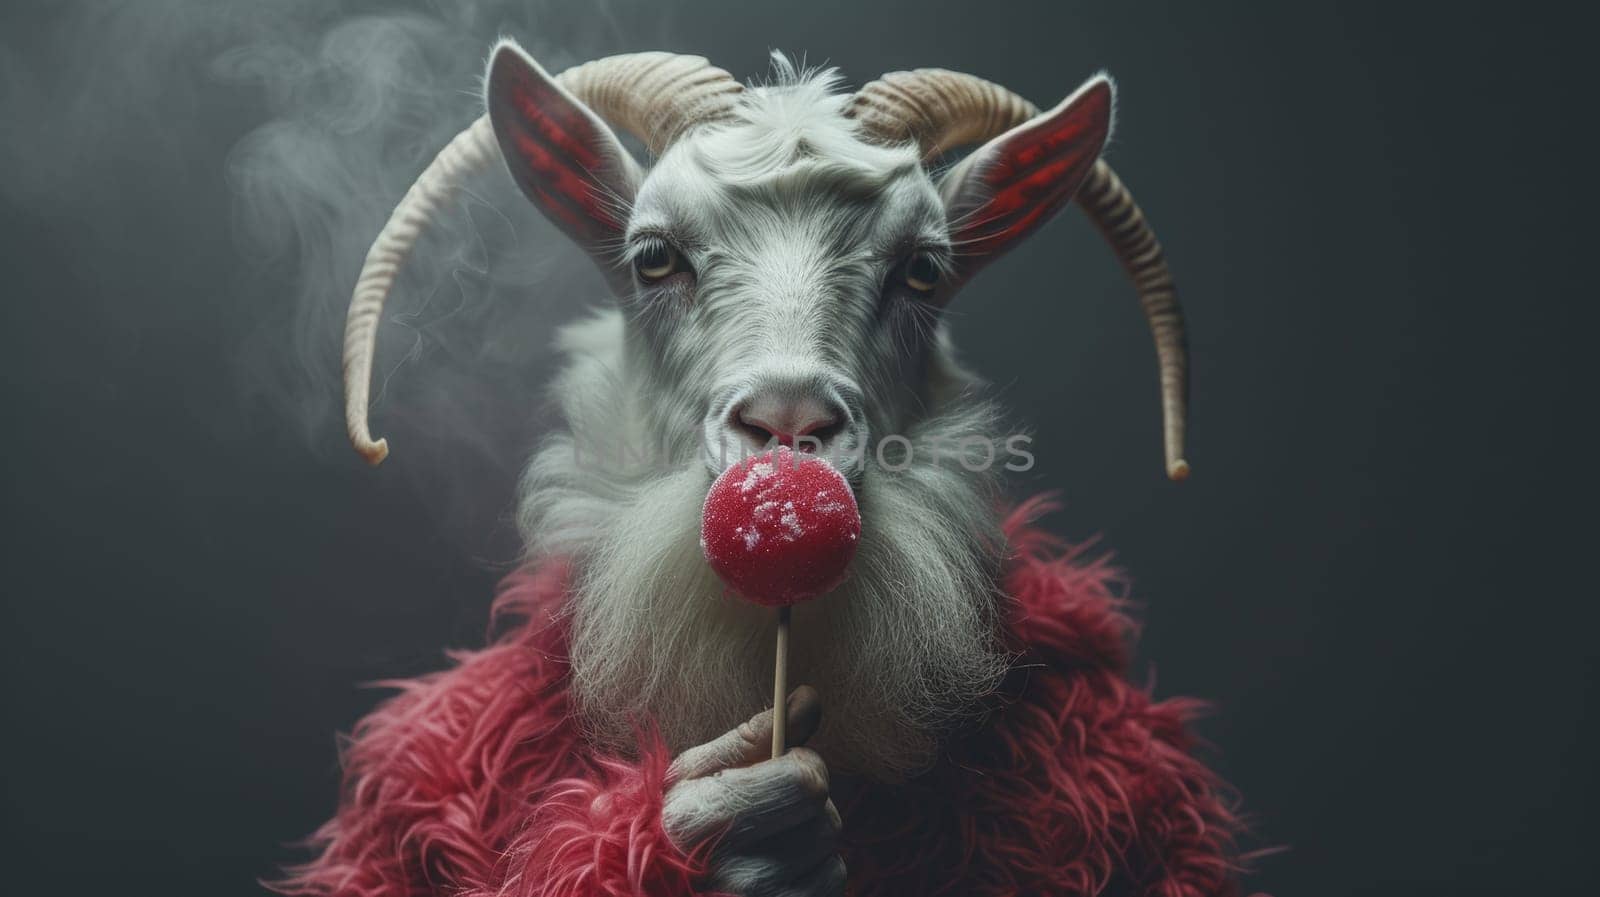 A goat wearing a red sweater and holding up a lollipop